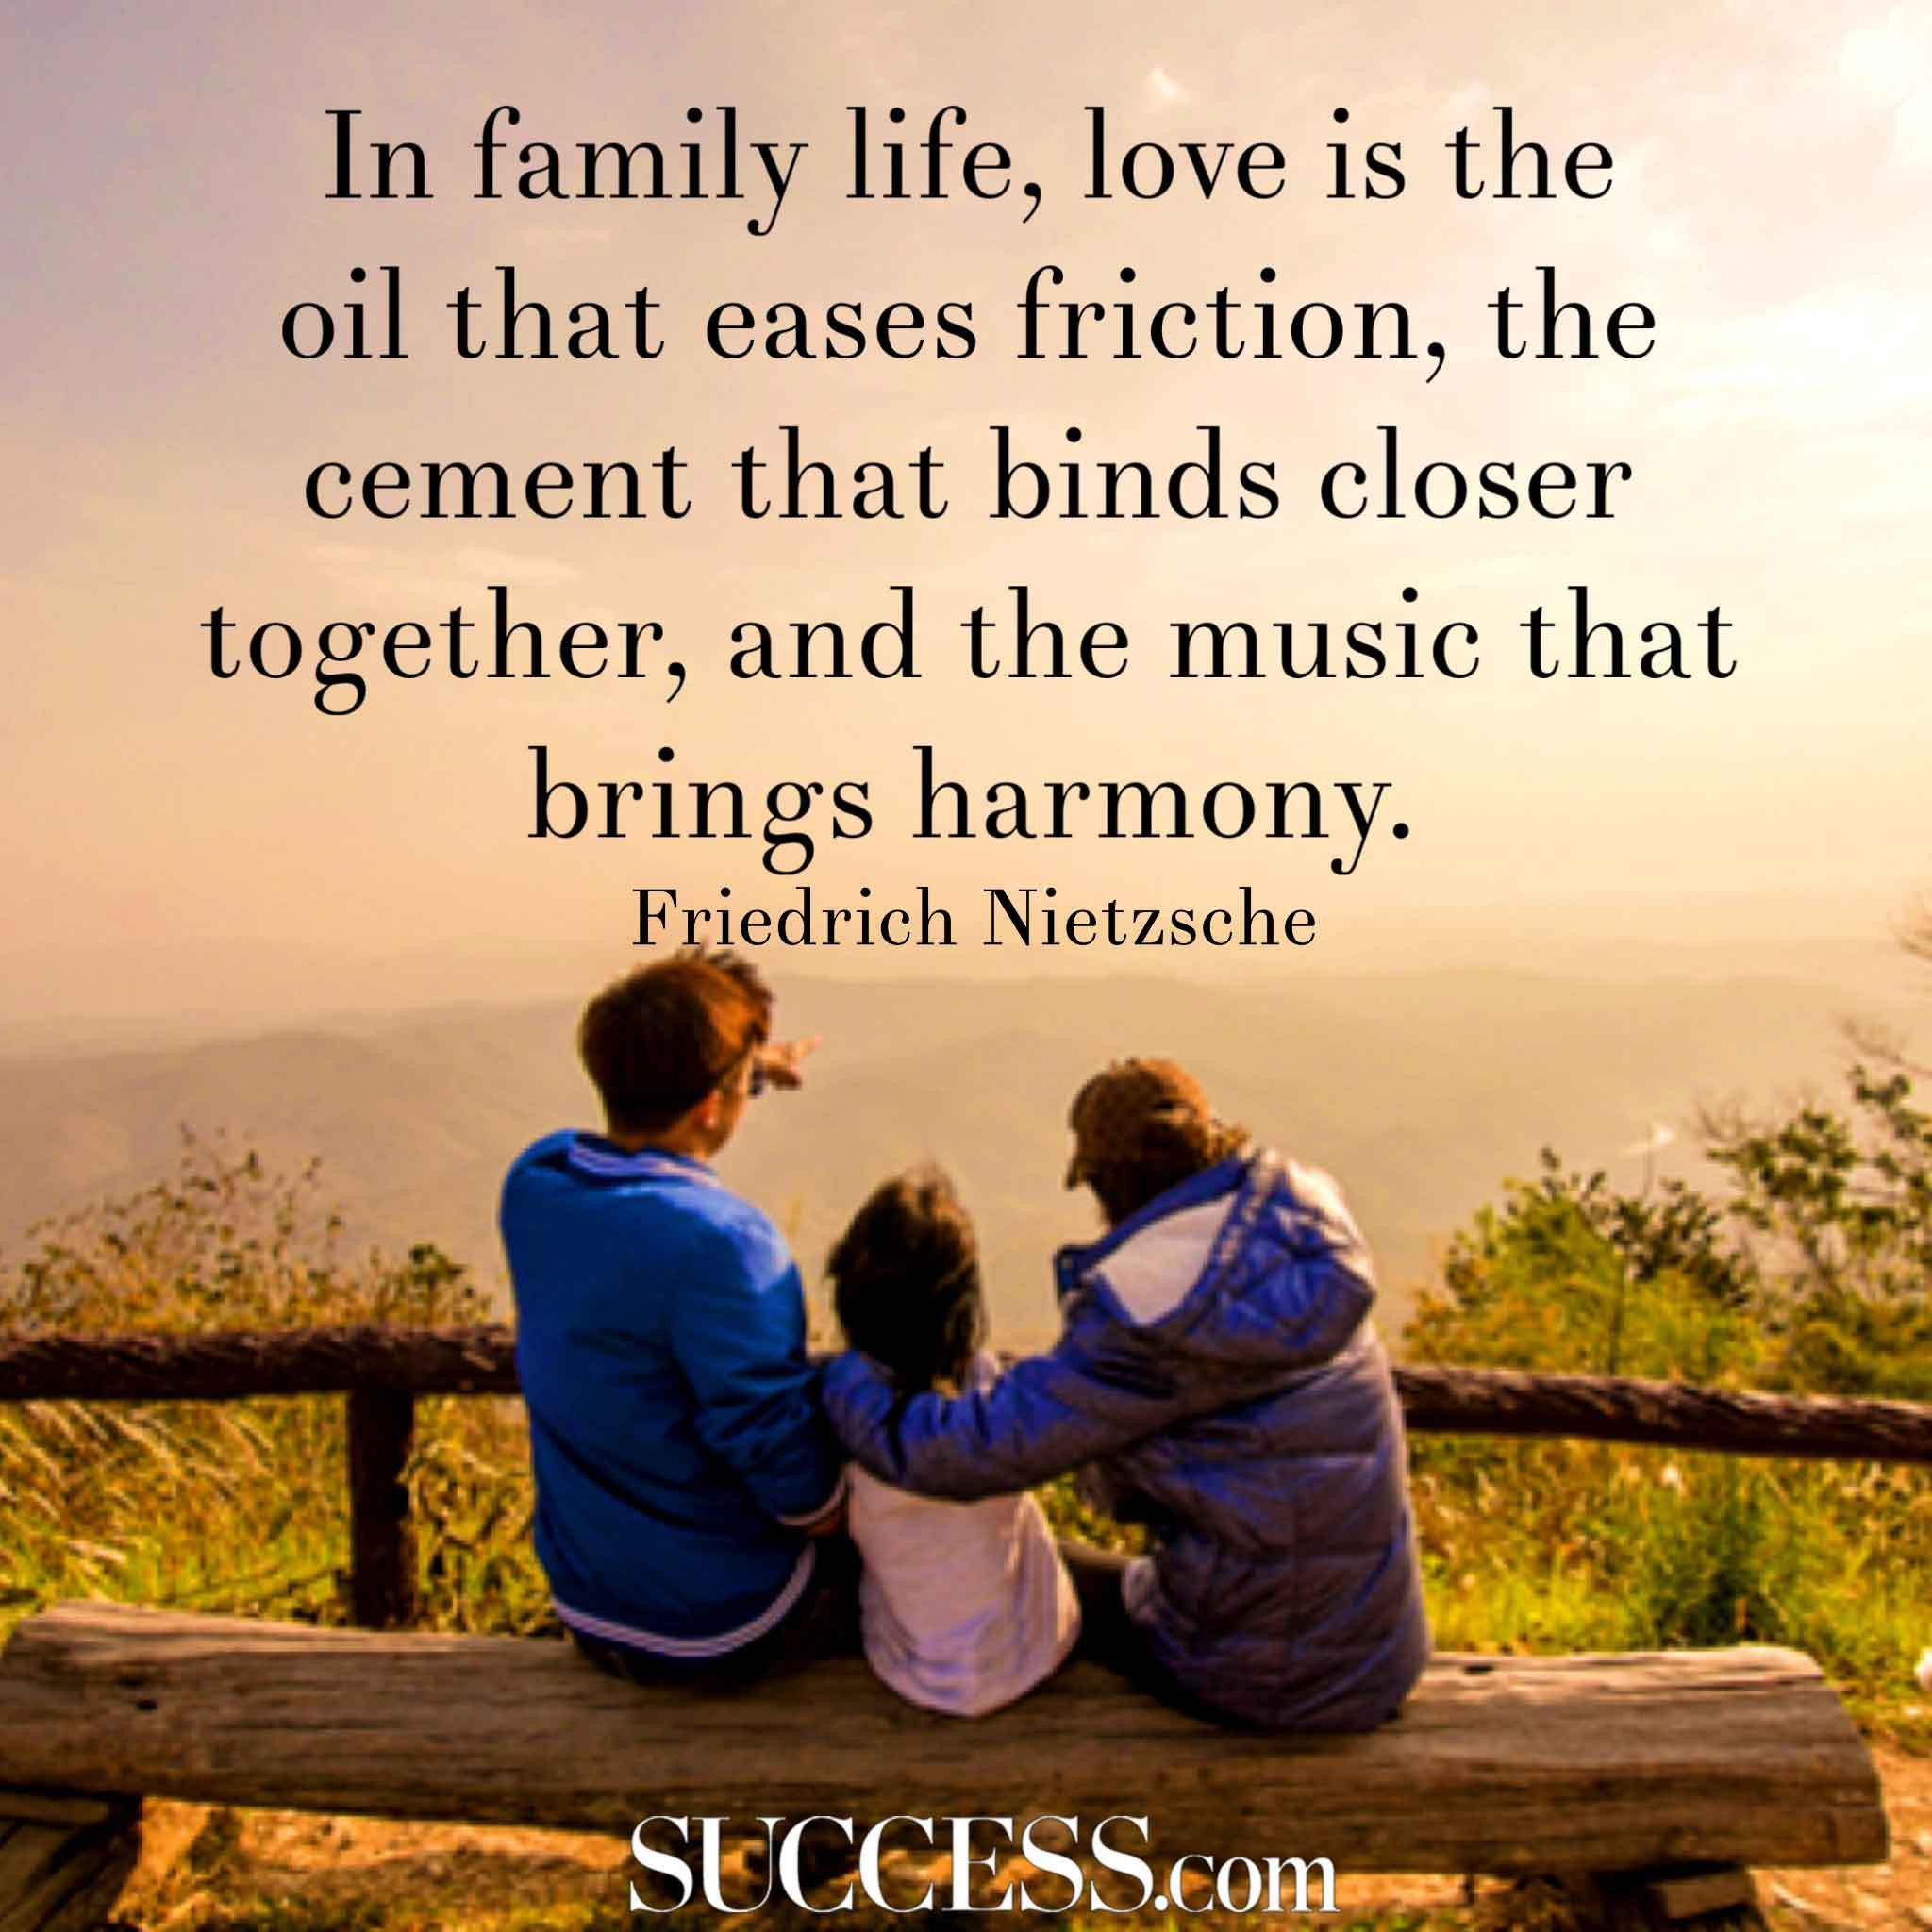 Quotes On Love And Family
 14 Loving Quotes About Family